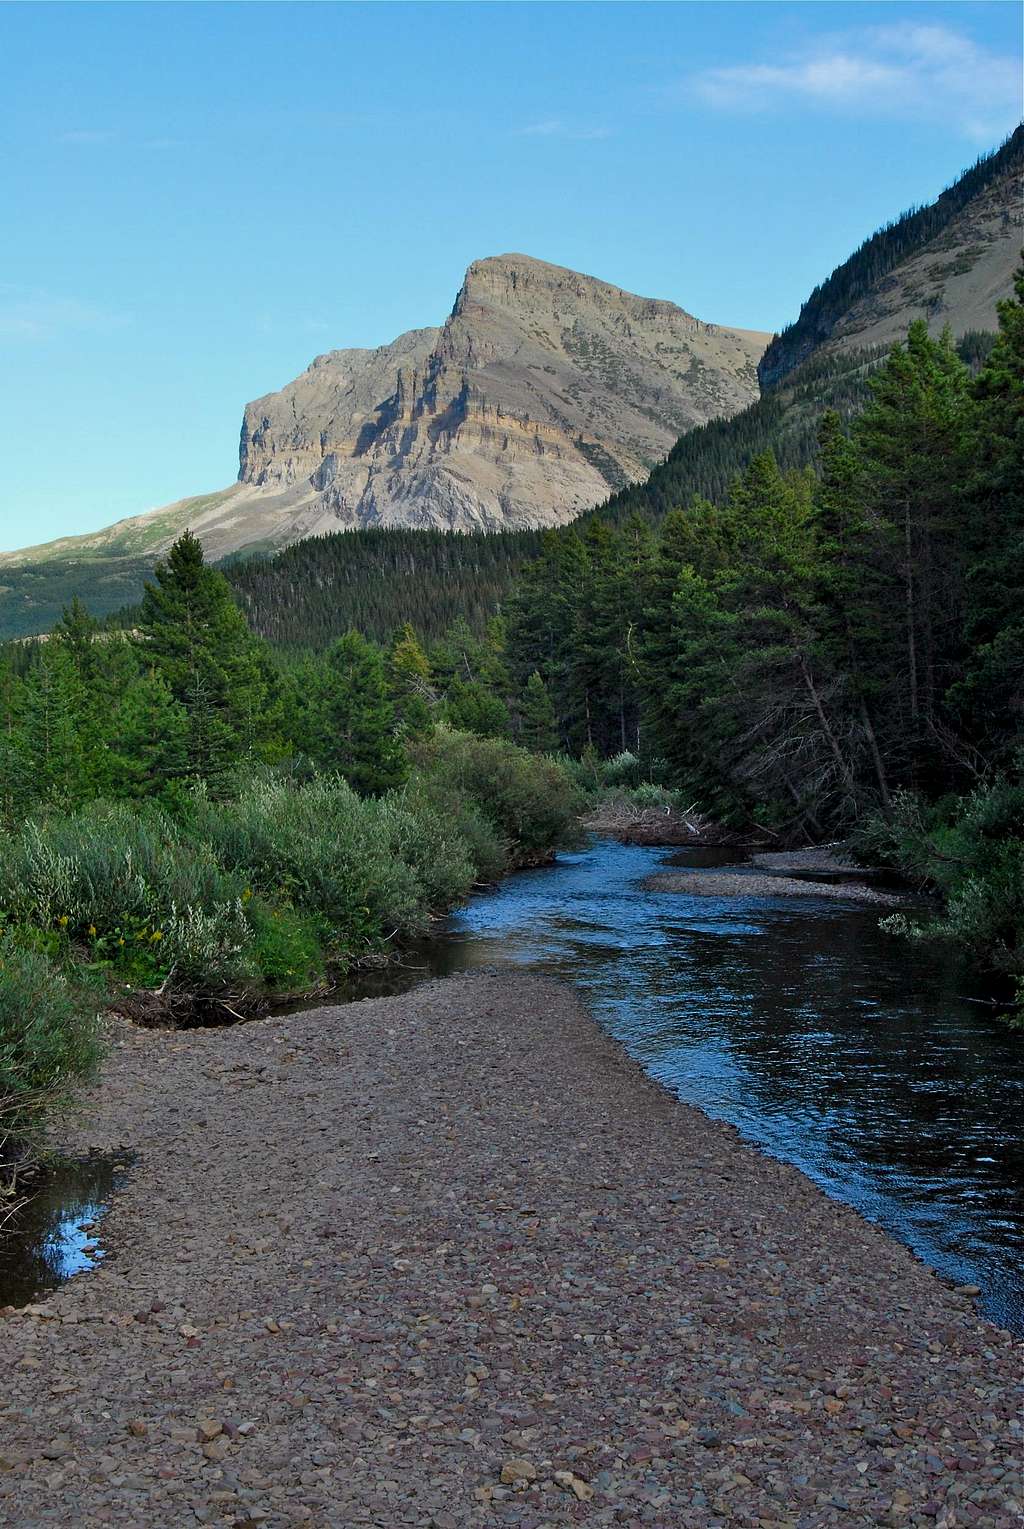 Wynn Mountain and Swiftcurrent Creek